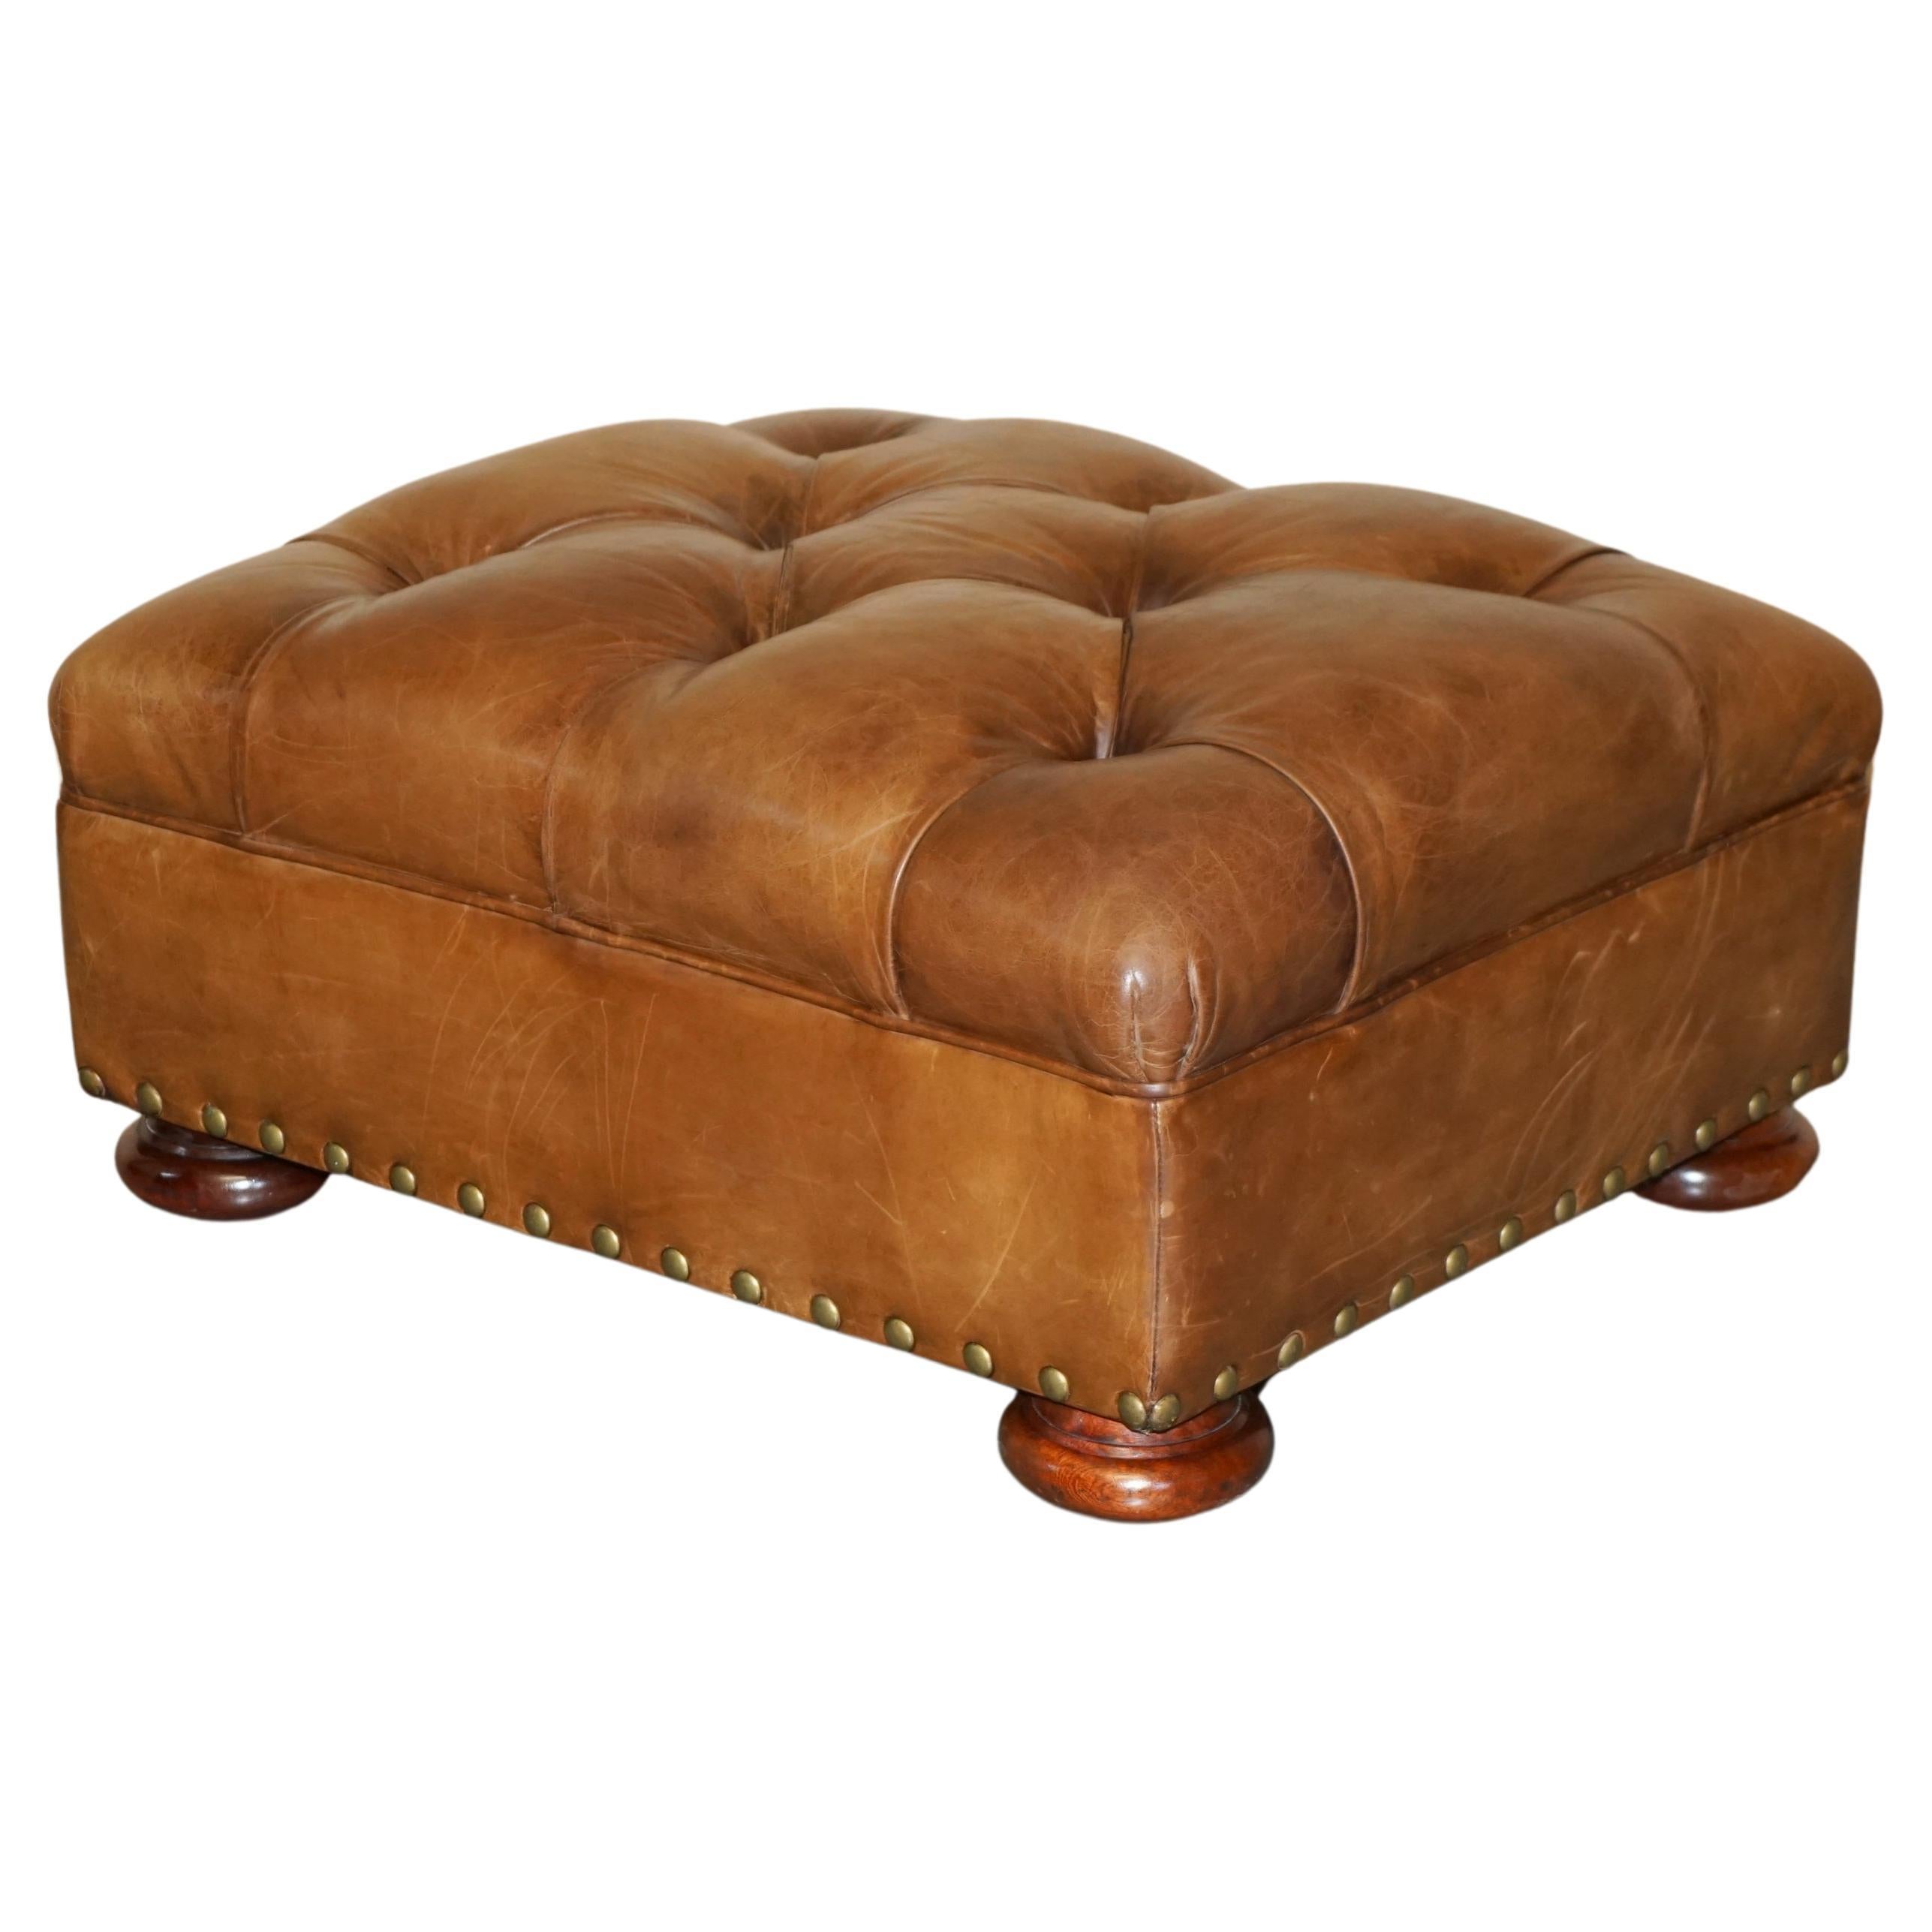 RALPH LAUREN WRITER'S CHESTERFIELD FOOTSTOOL OTTOMAN IN HERiTAGE BROWN LEATHER